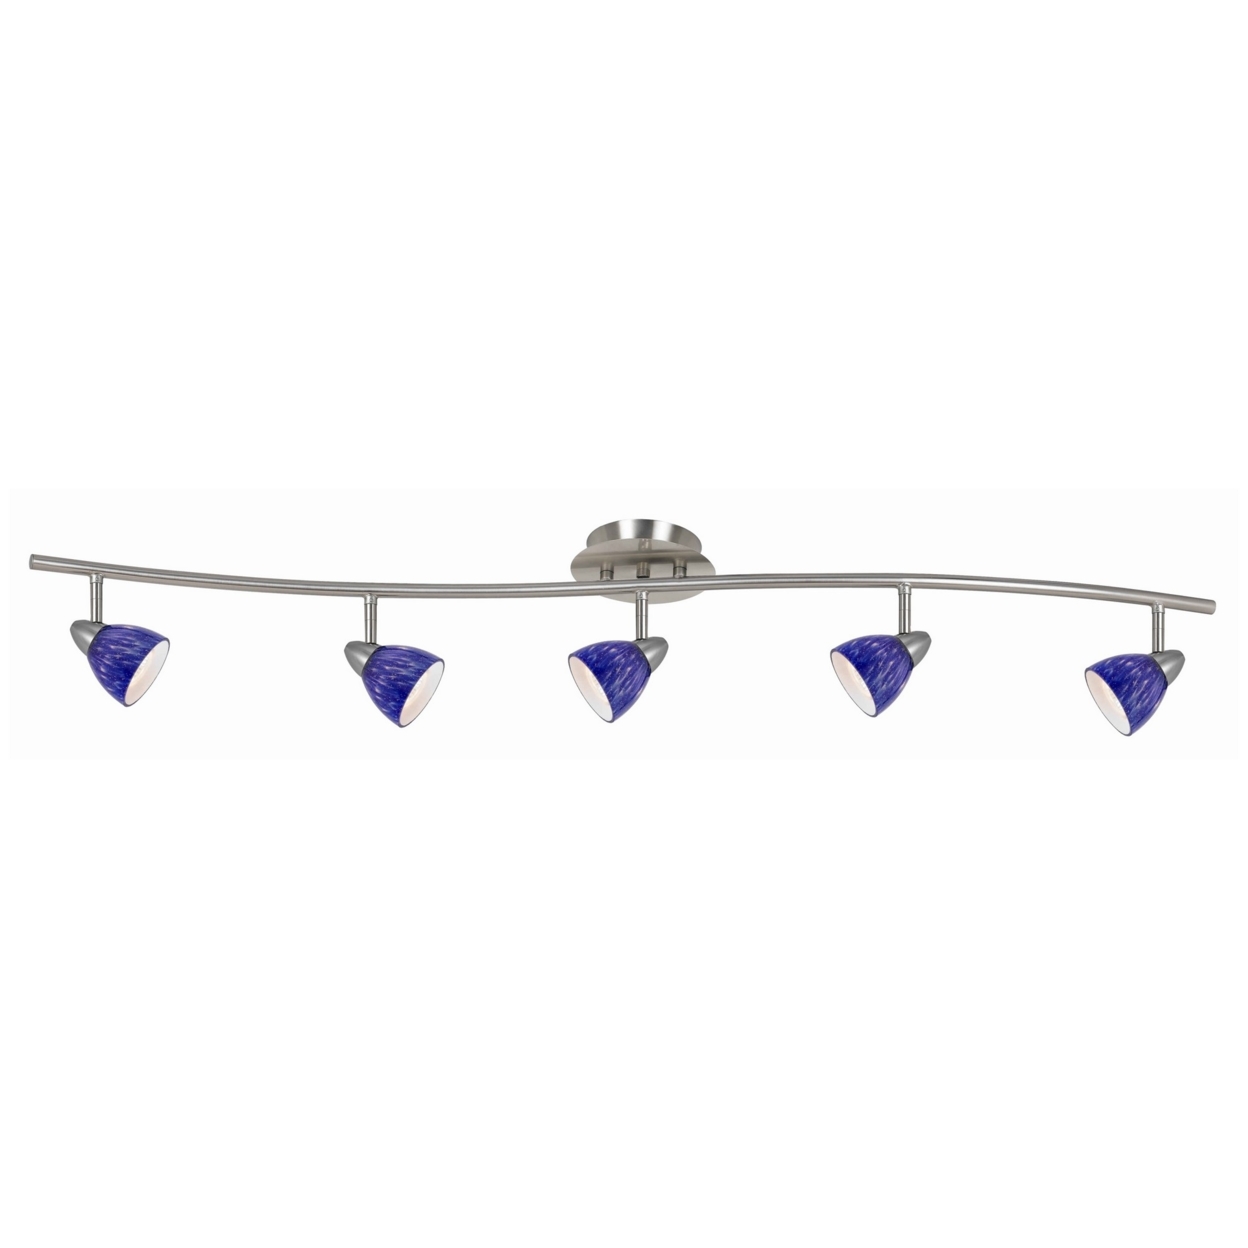 5 Light 120V Metal Track Light Fixture With Textured Shade, Silver And Blue- Saltoro Sherpi